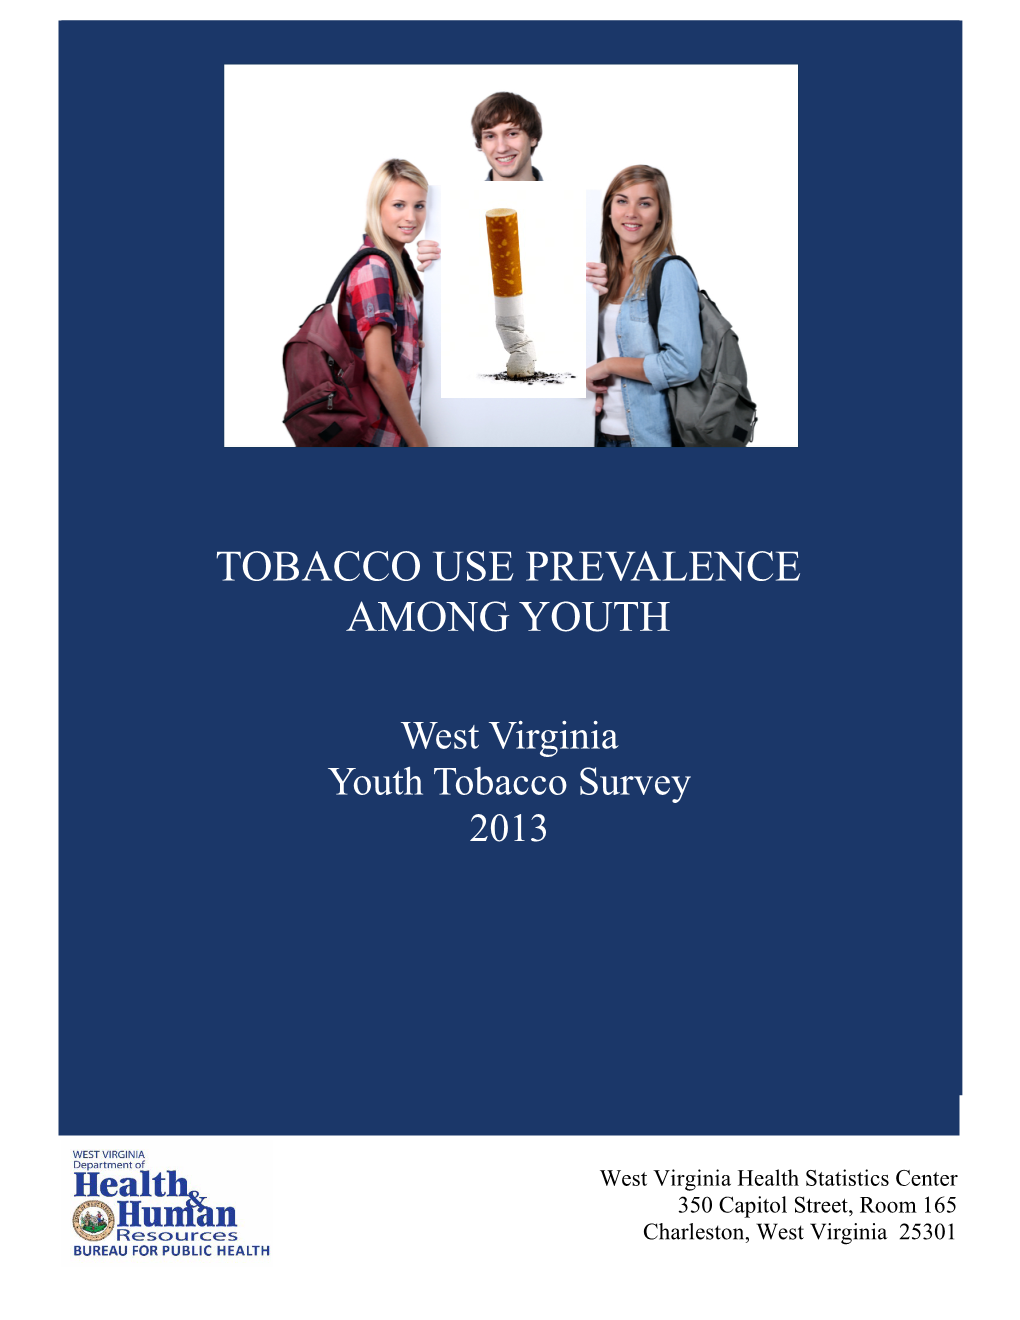 TOBACCO USE PREVALENCE AMONG YOUTH West Virginia Youth Tobacco Survey, 2013